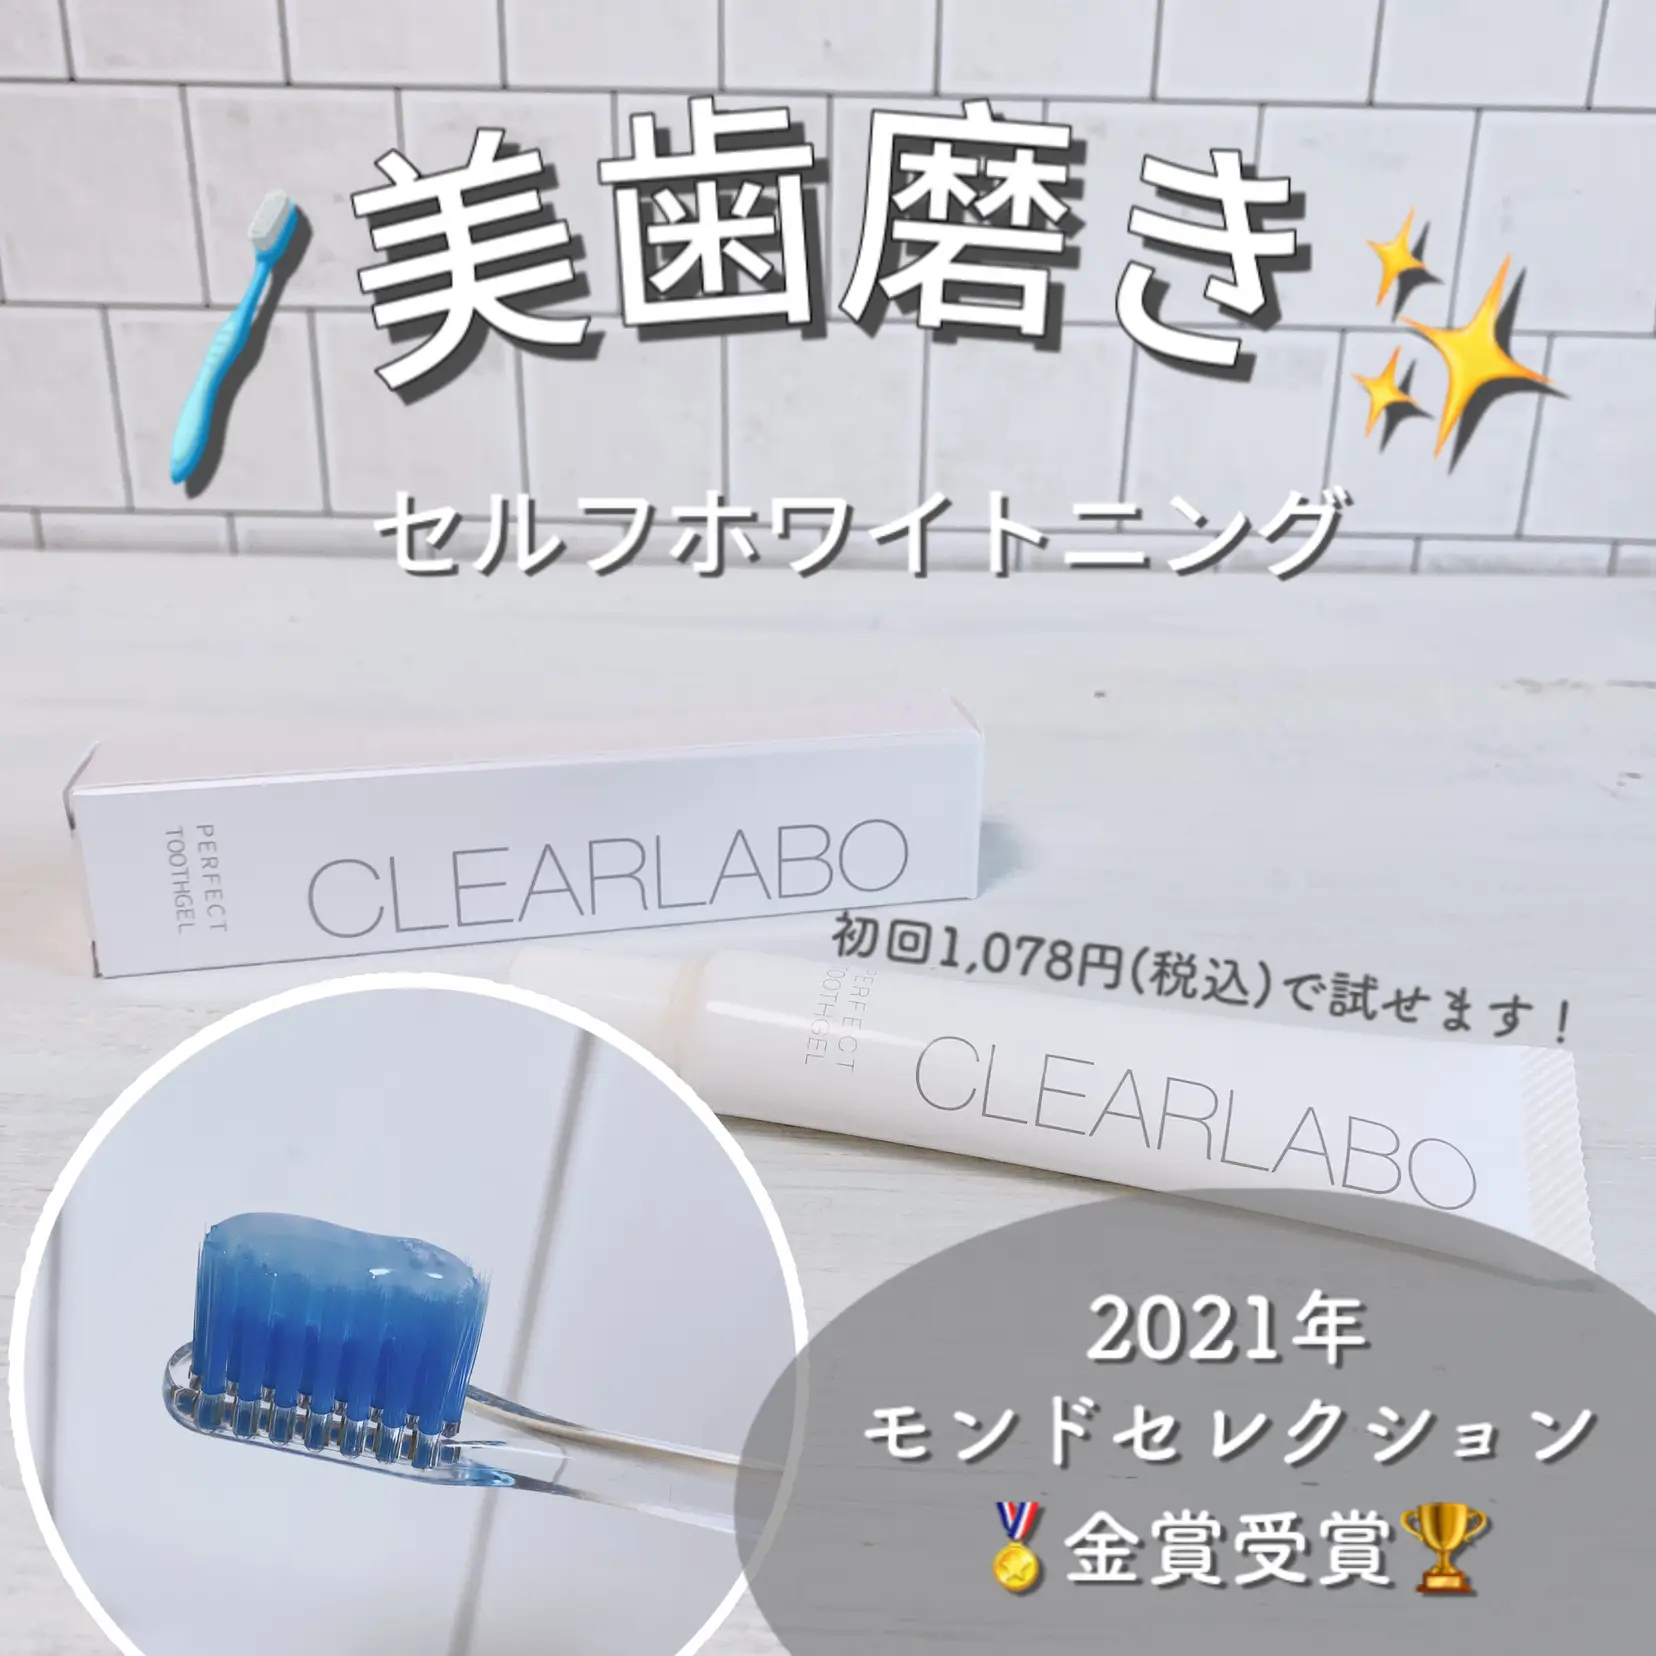 Easy whitening at home    ✨ | Gallery posted by hako_niwa | Lemon8